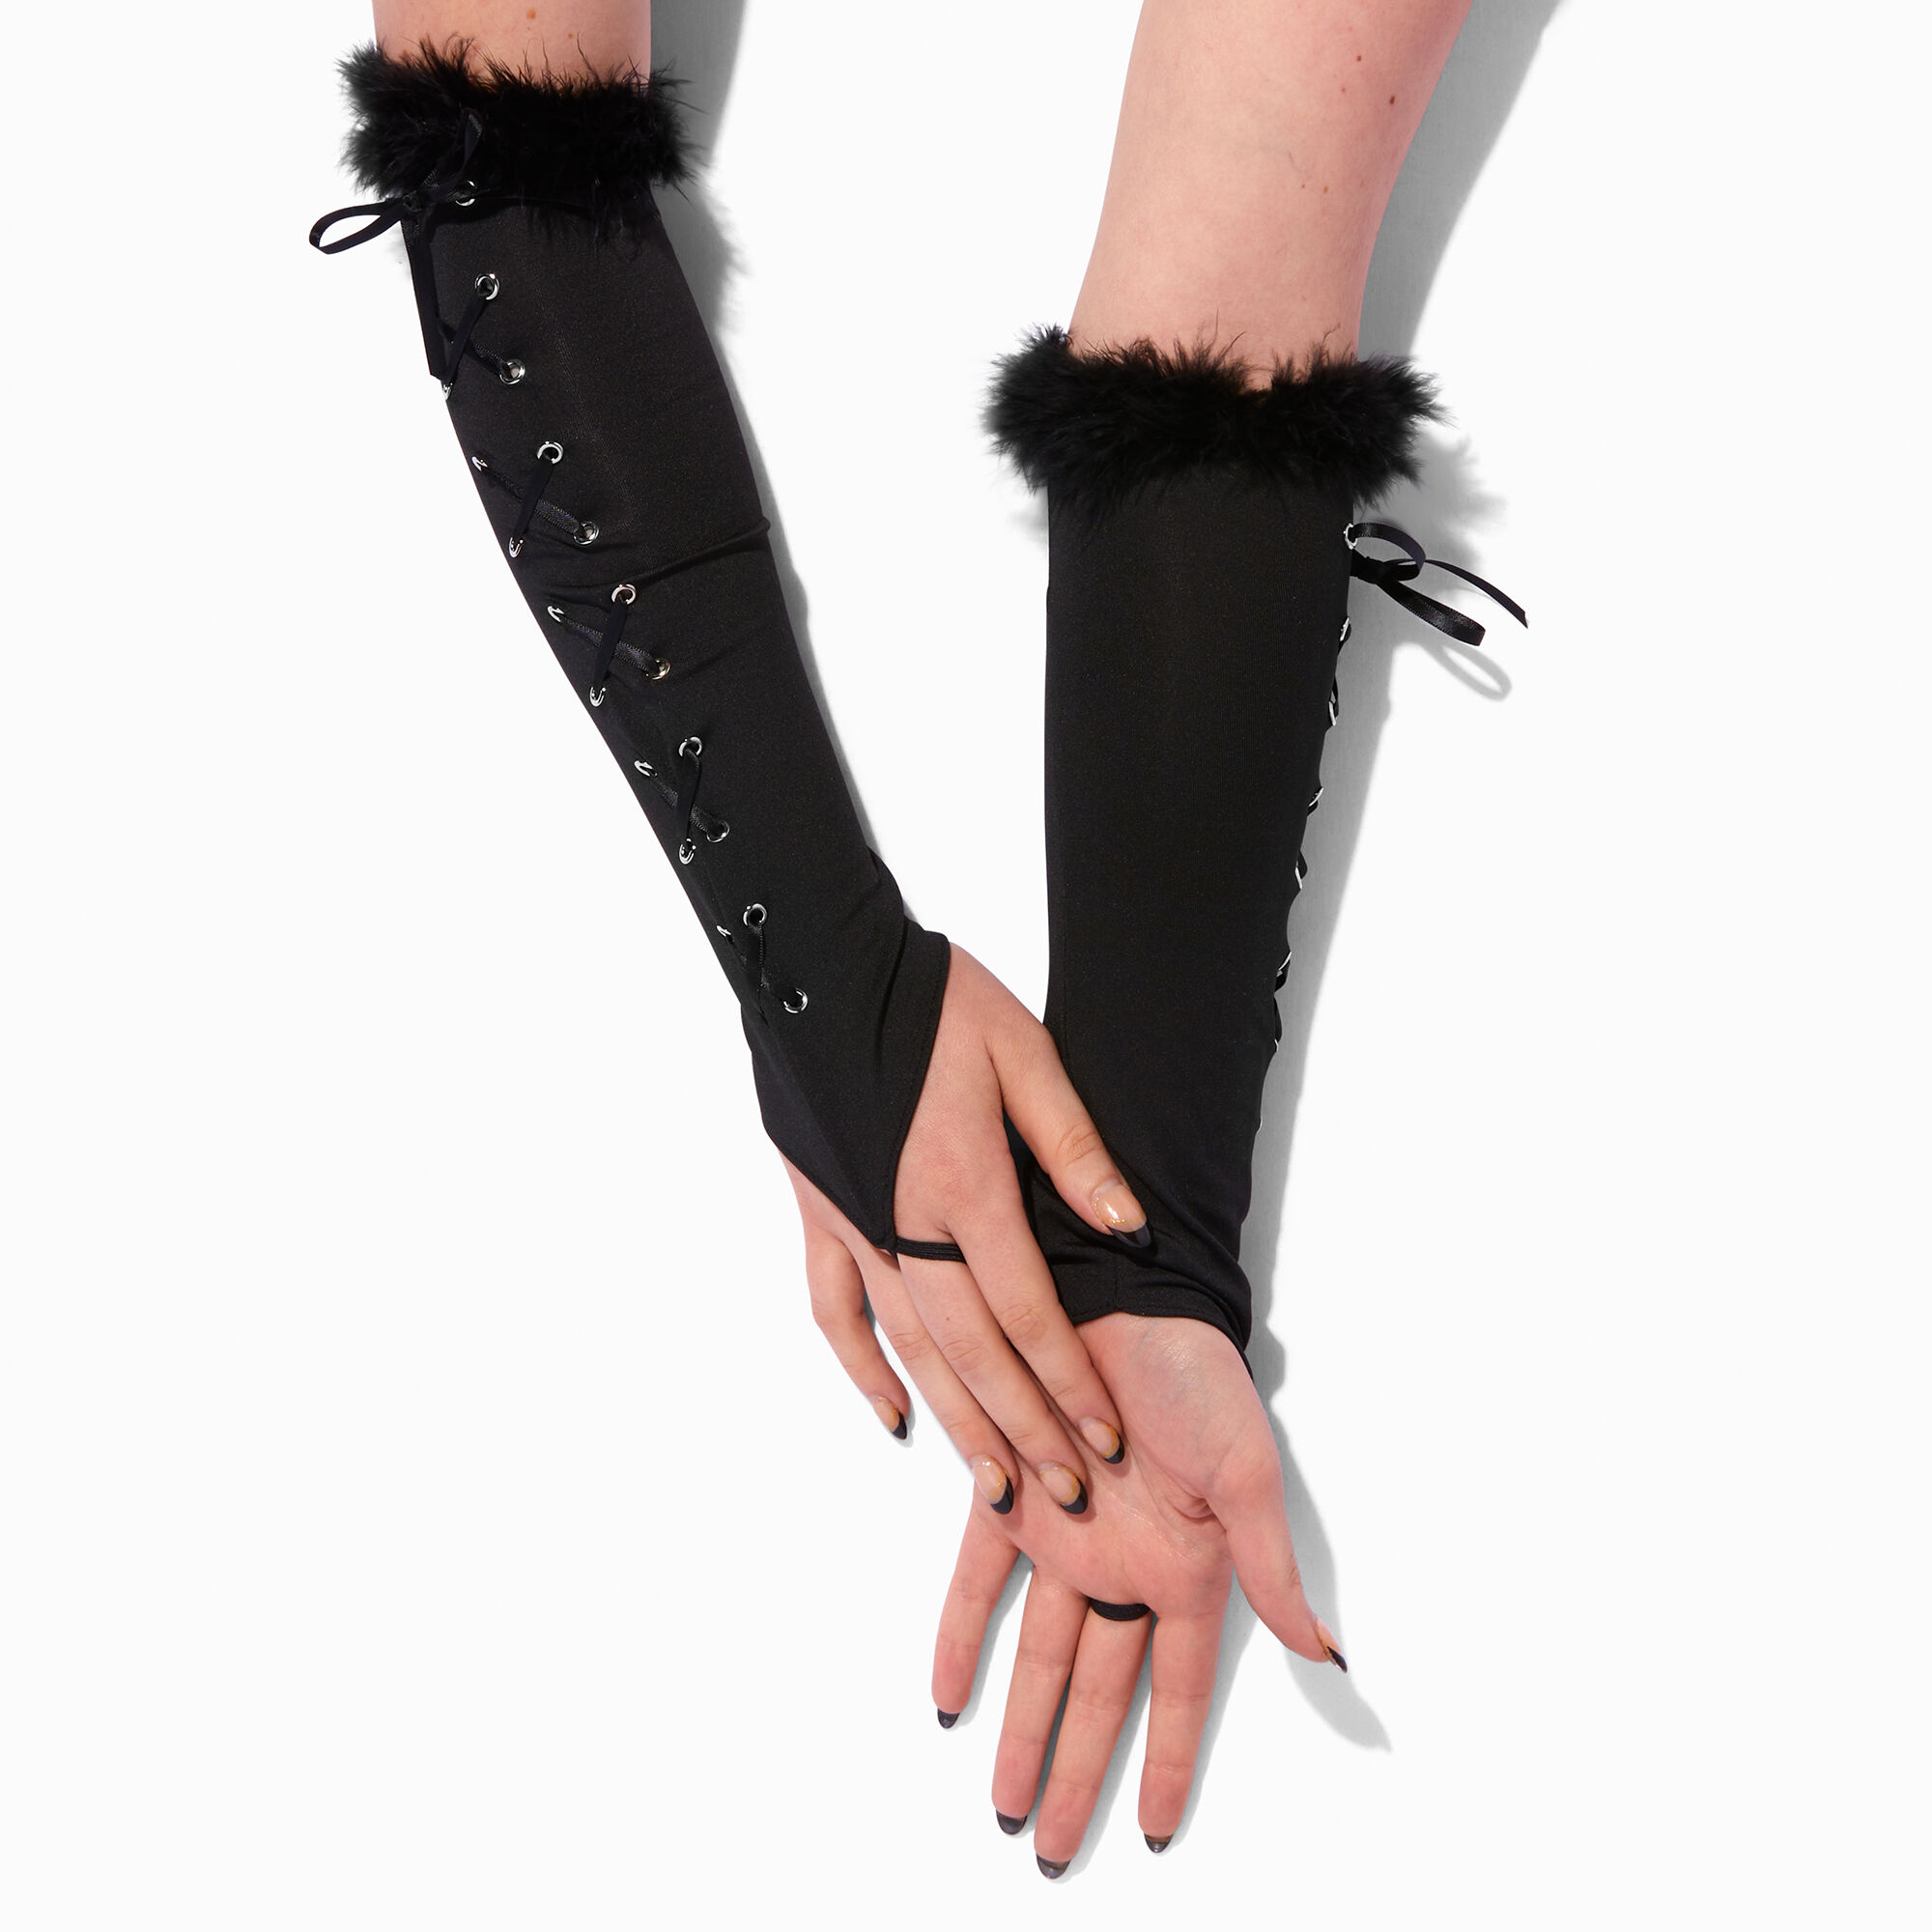 View Claires Feathery Lace Up Long Arm Warmers Black information